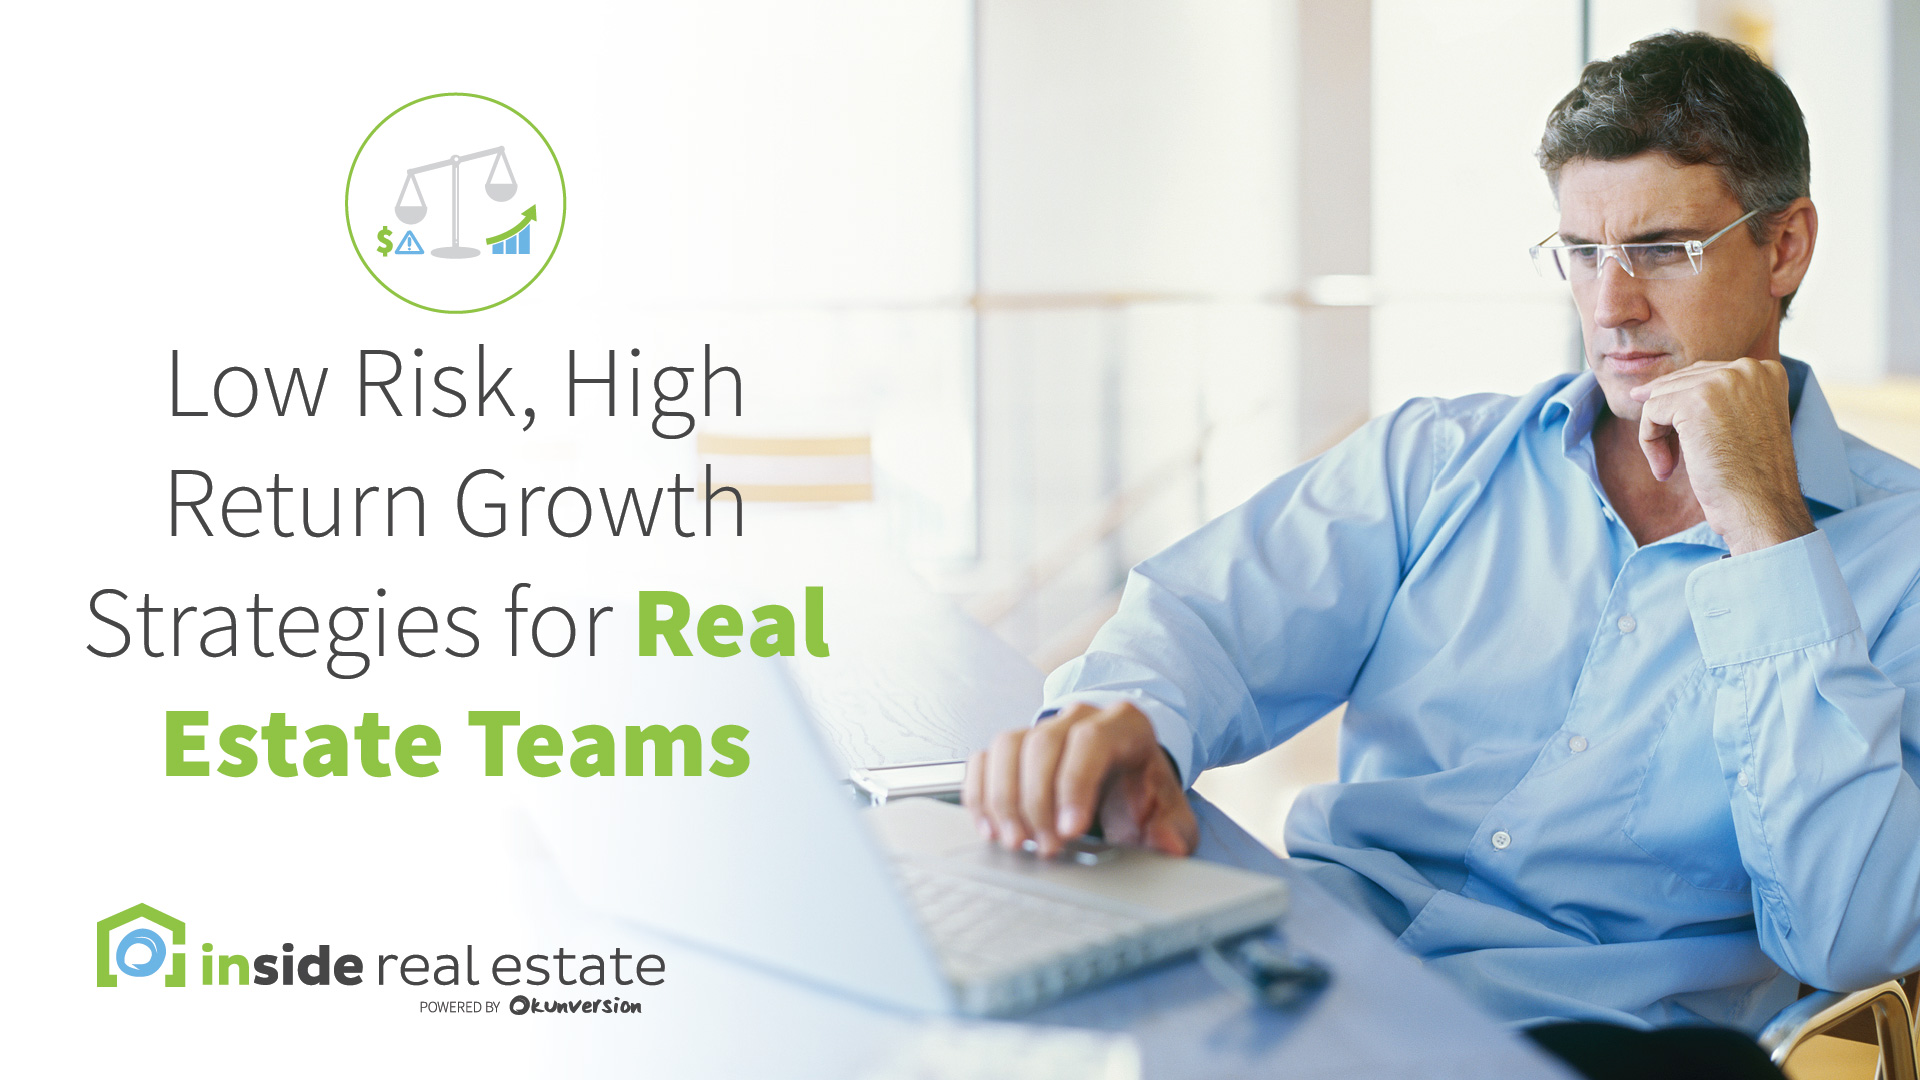 ire low risk high return growth strategies real estate teams